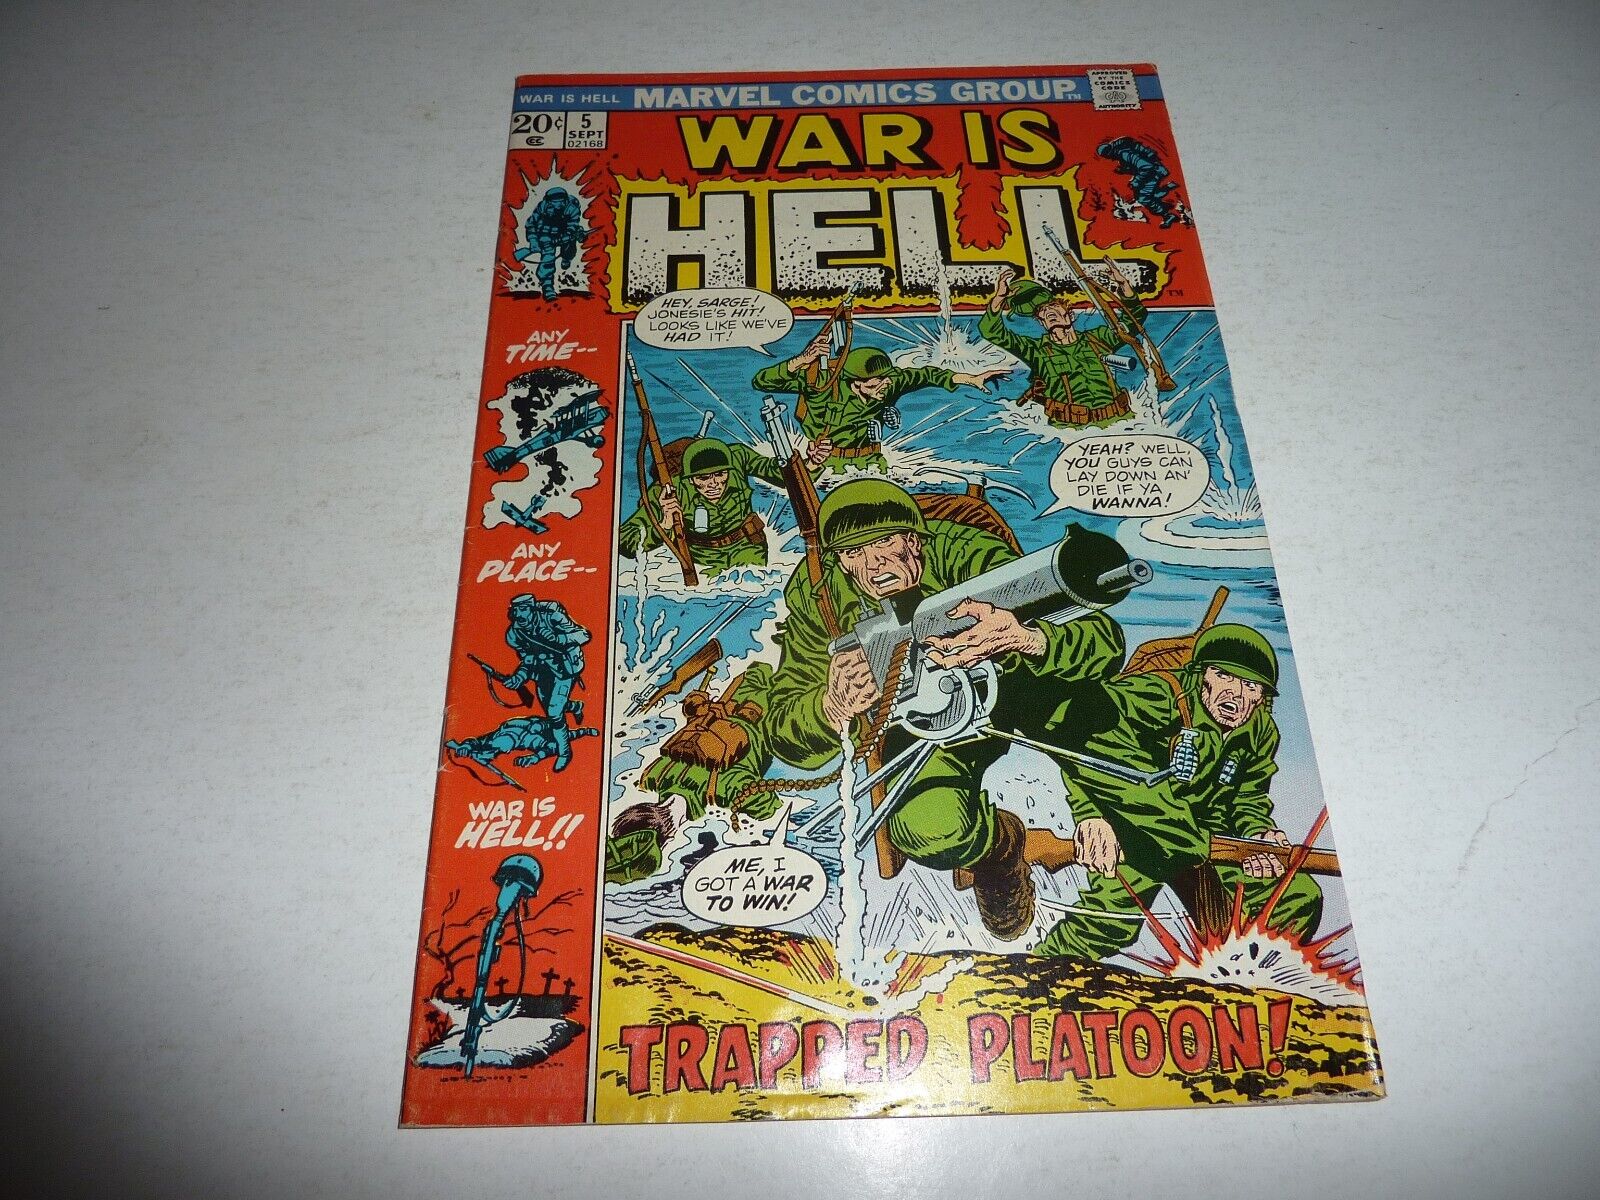 WAR IS HELL #5 Marvel Comics 1973 Trapped Platoon! Glossy VG/FN 5.0